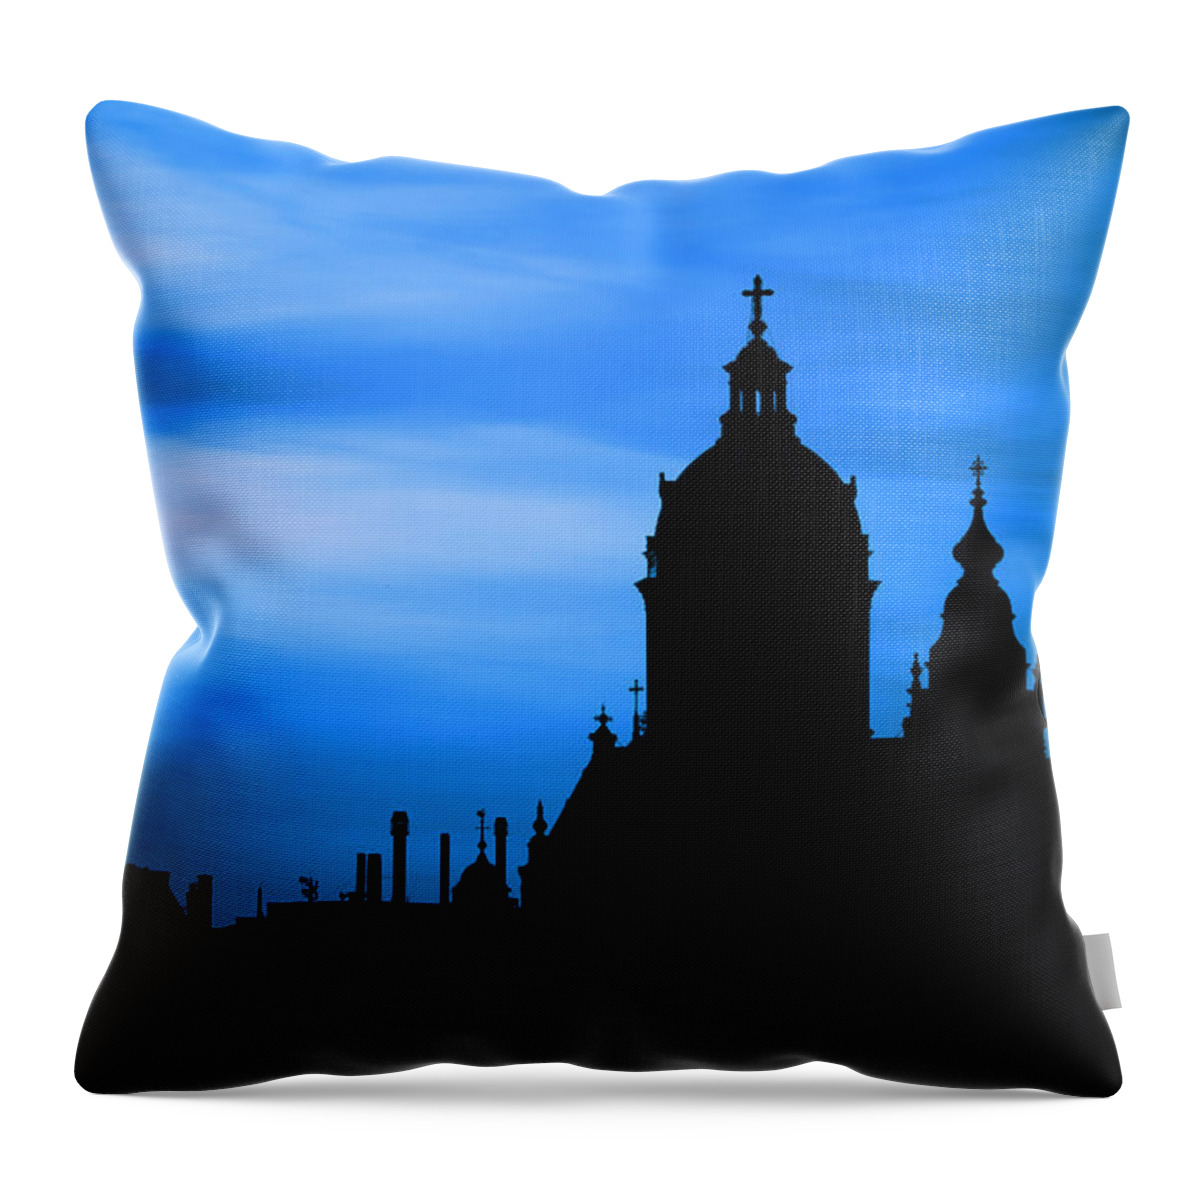  Throw Pillow featuring the photograph Sky Towers by Digital Art Cafe